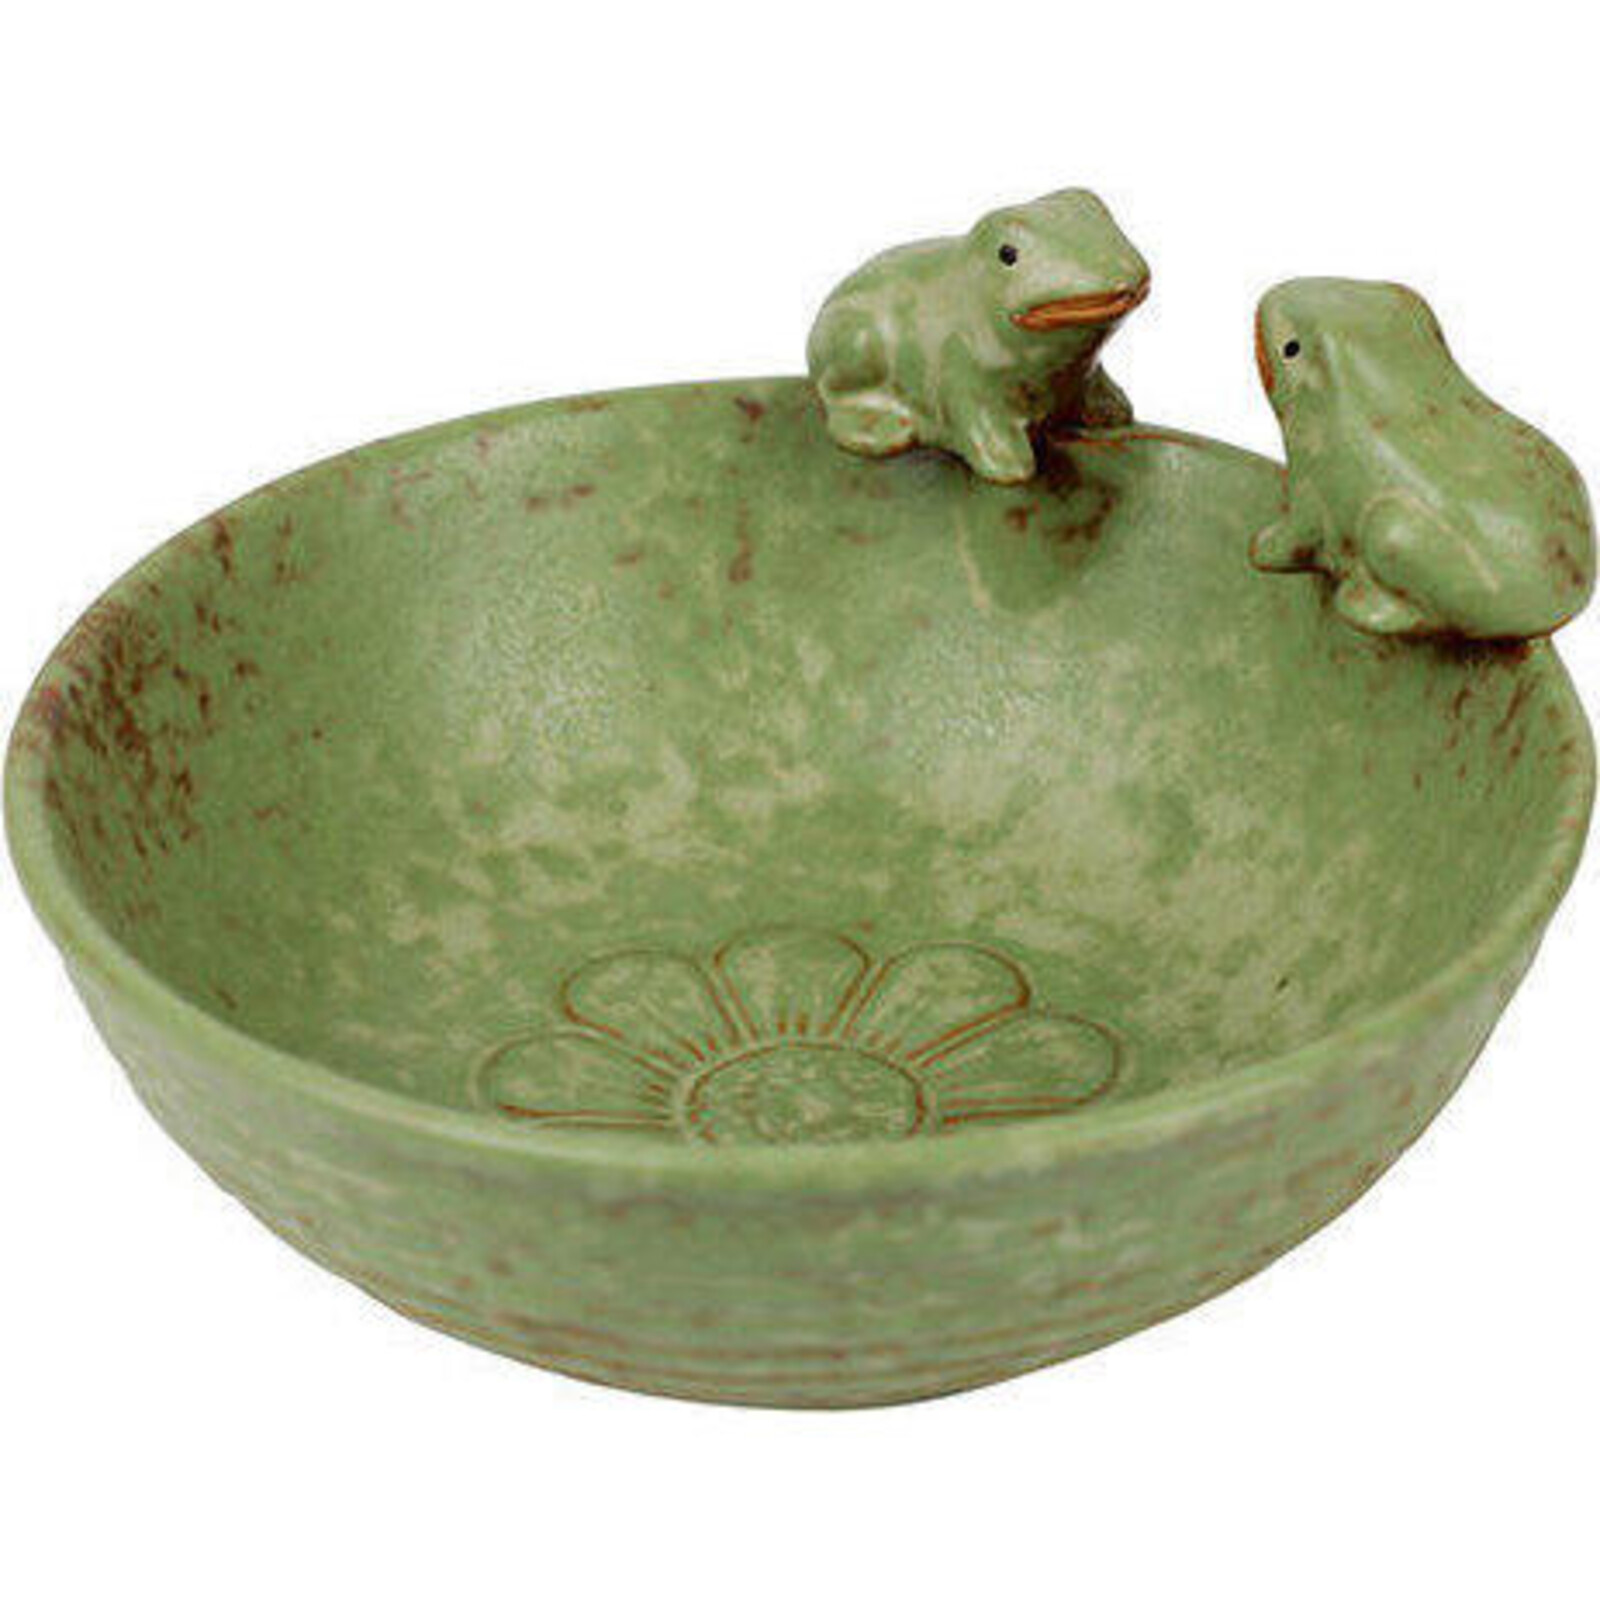 Bowl with Frogs